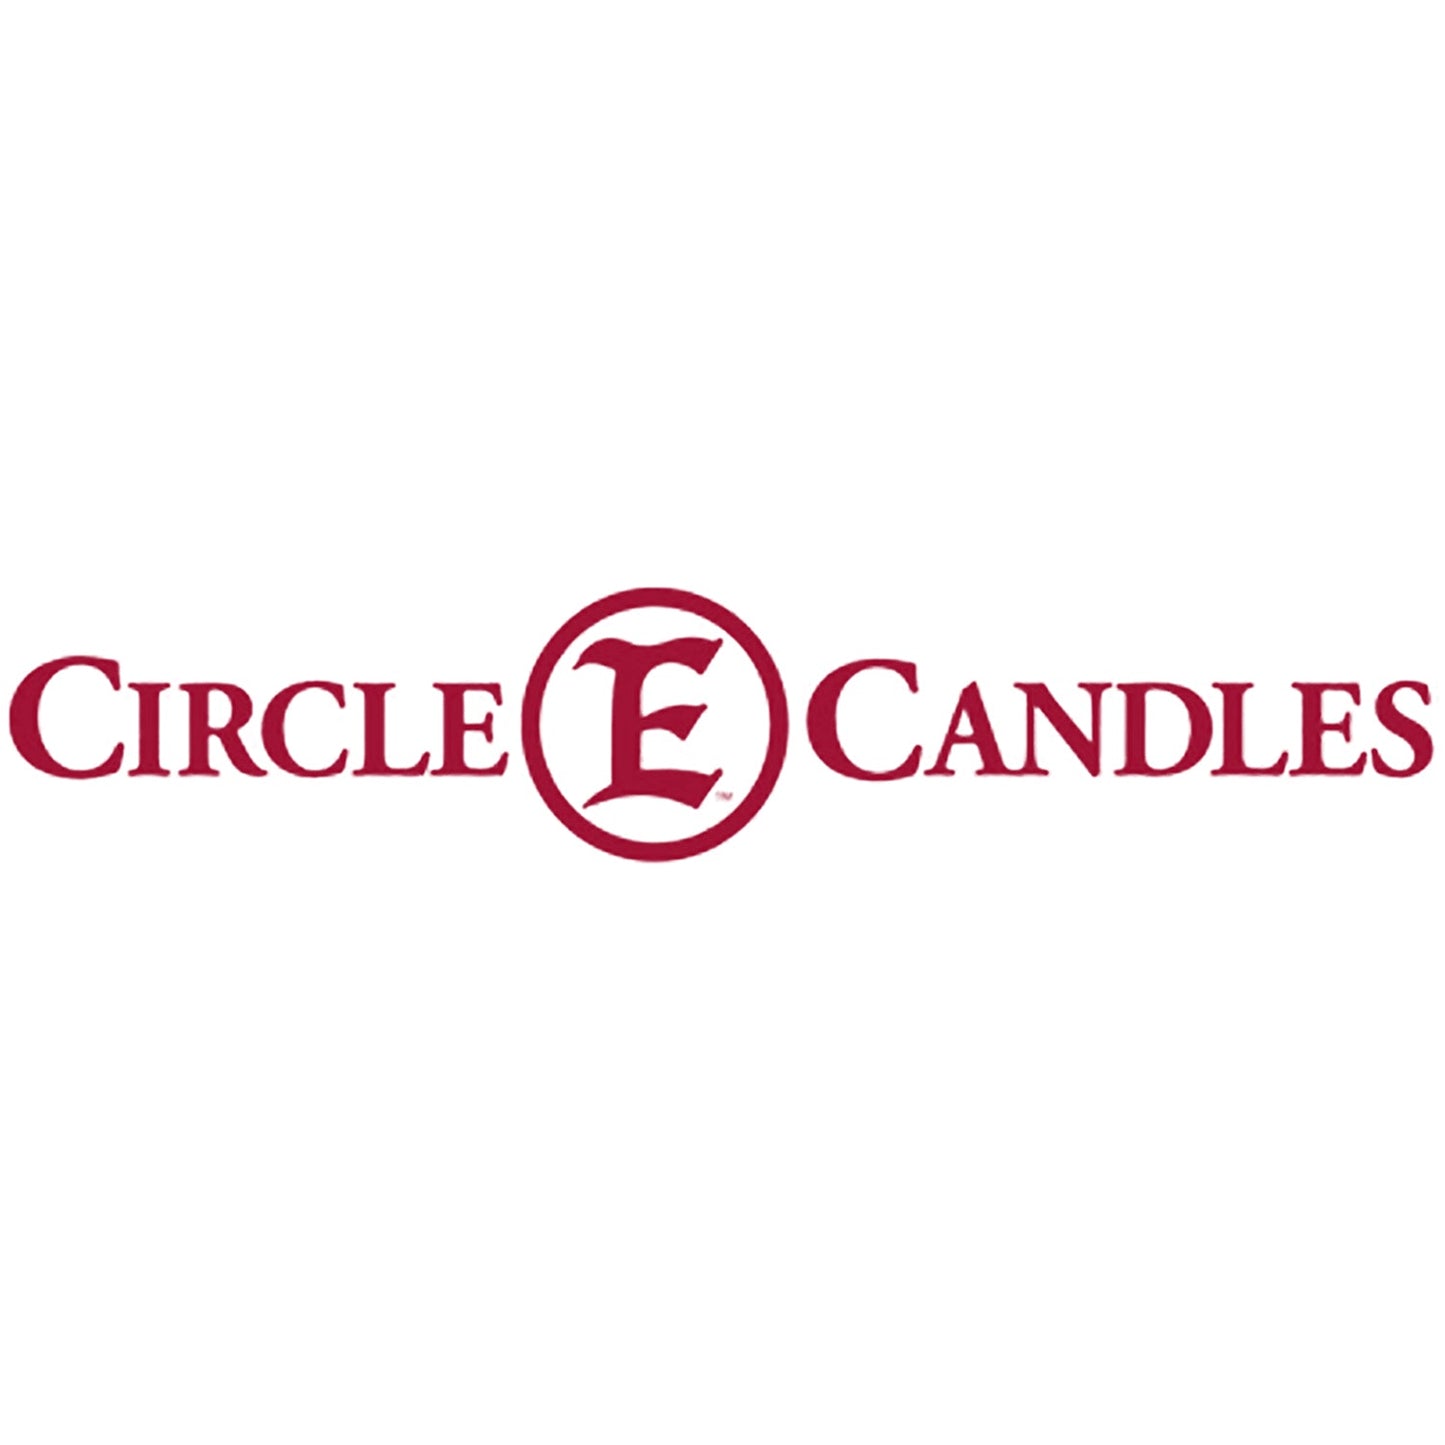 Circle E Candles Wax Melt Tart, Country Morning Scent, Pack of 10 Tarts